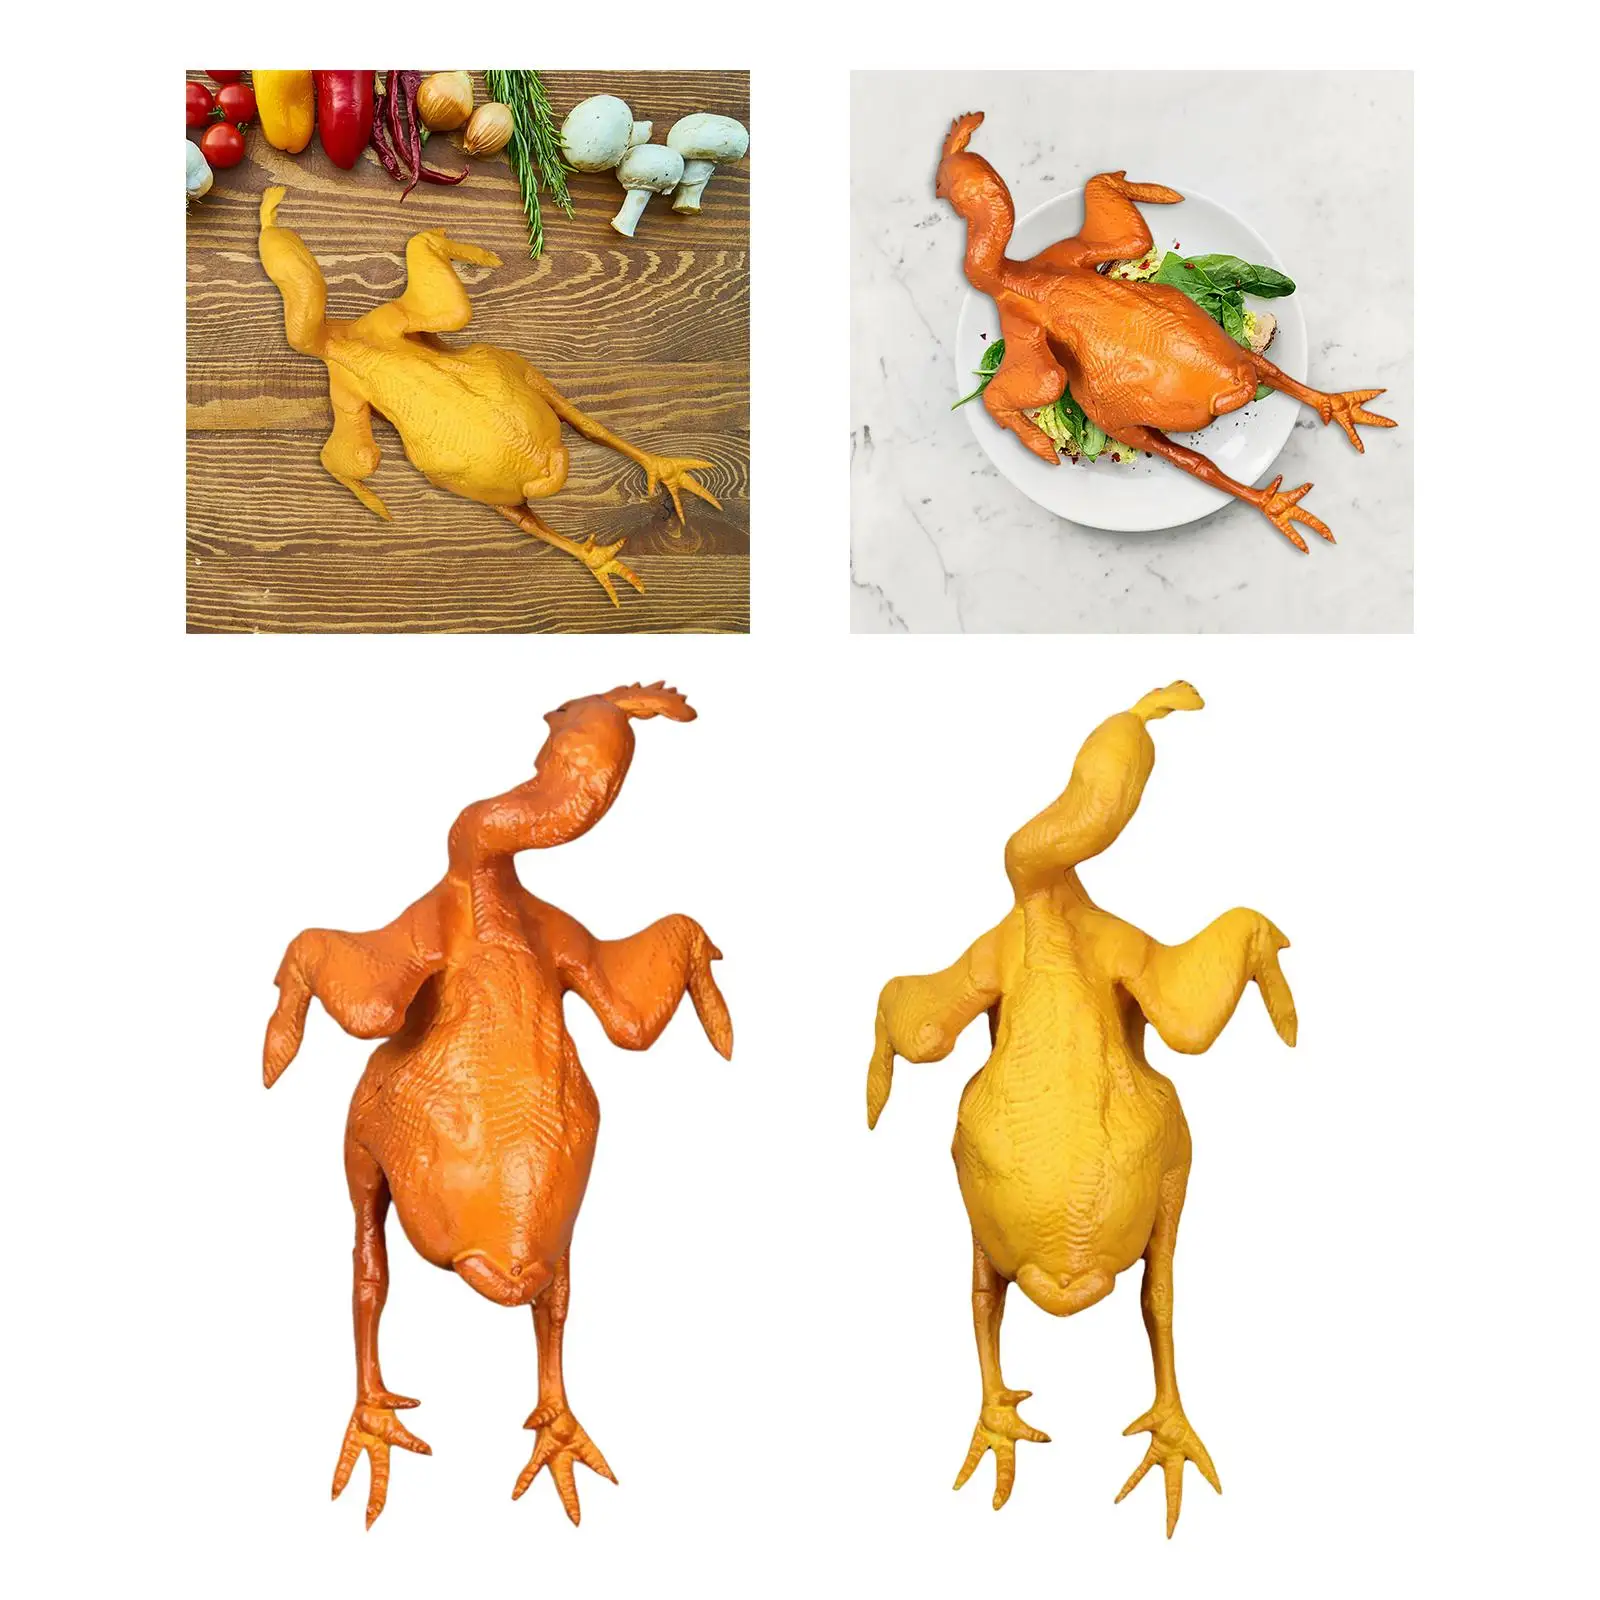 Roast Chicken Model Lifelike Fake Food Photography Props for Home Kitchen Cabinet Thanksgiving Party Dining Table Decoration